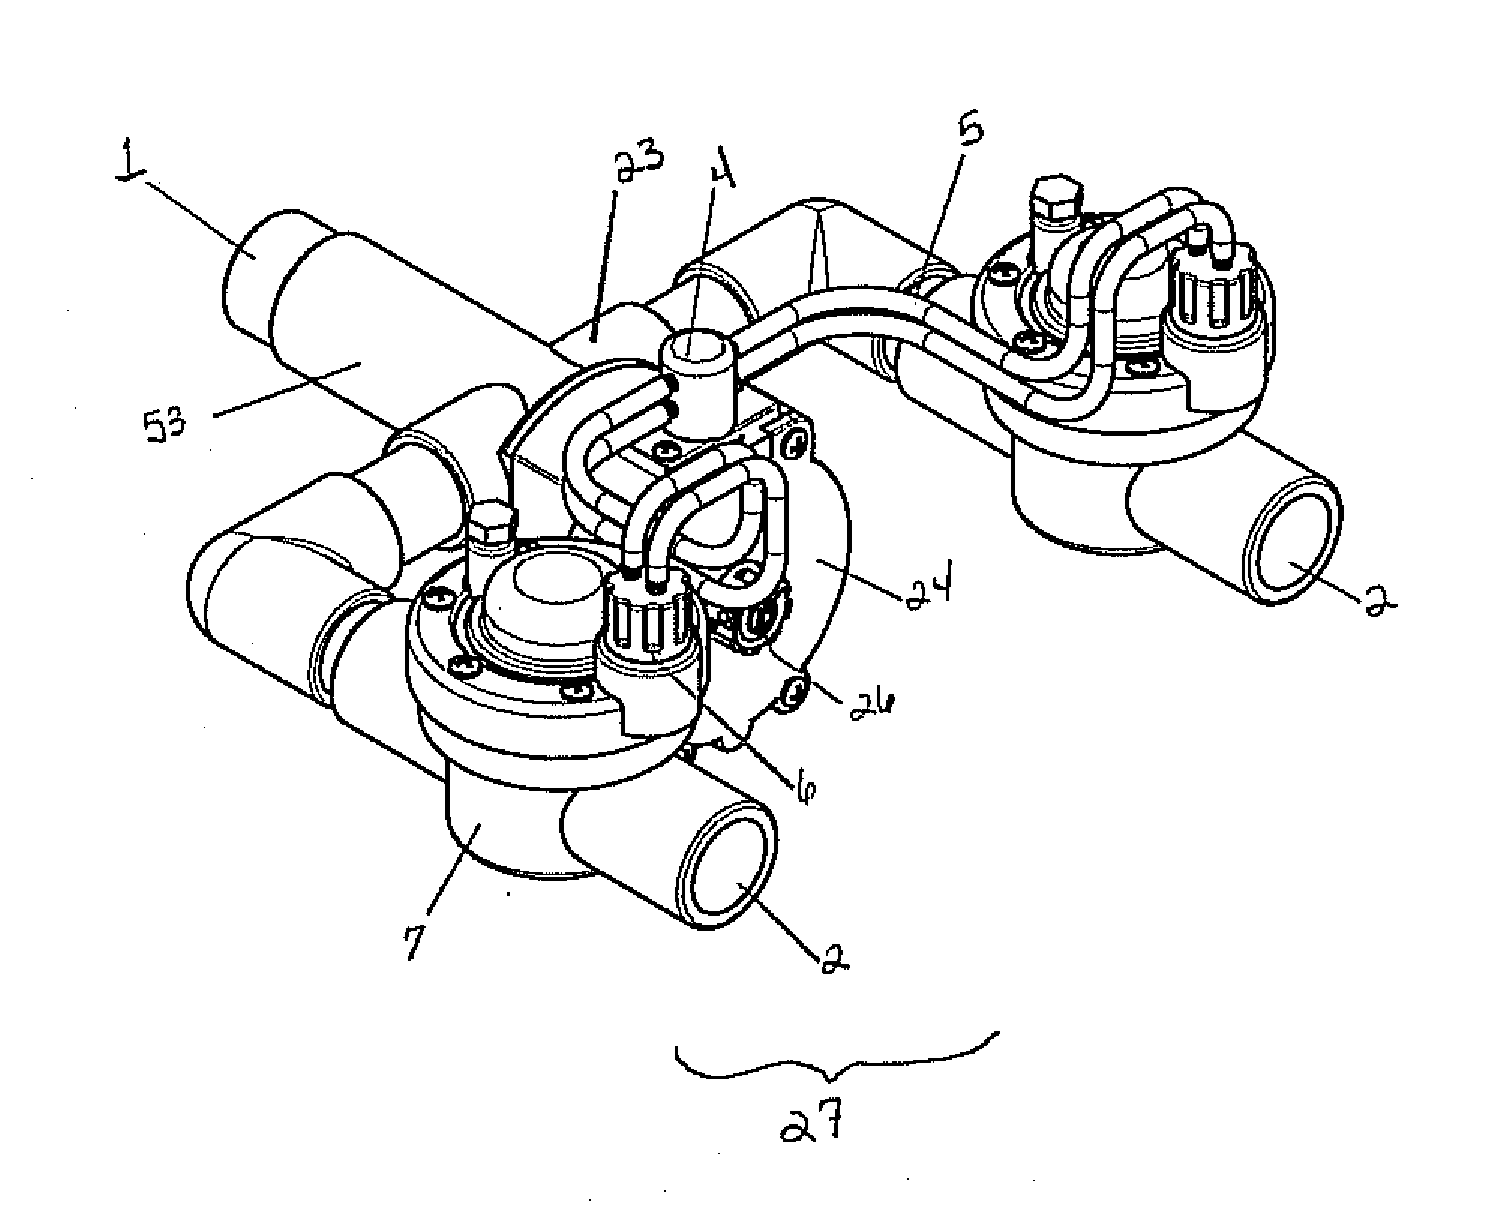 Fluid activated flow control system